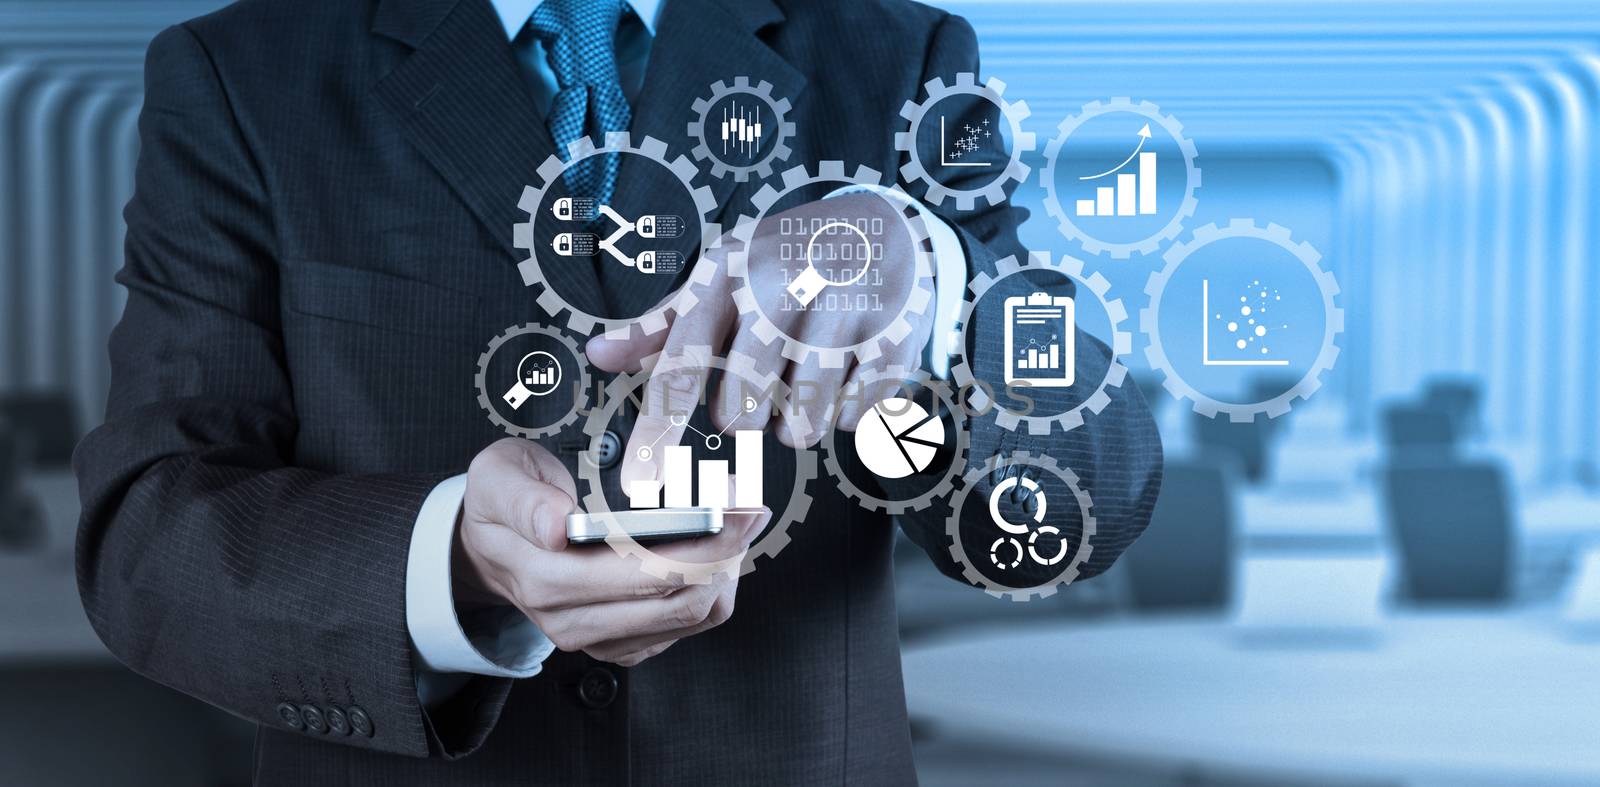 Business data analytics management with connected gear cogs with KPI financial charts and graph.businessman hand use smart phone computer with email icon as concept